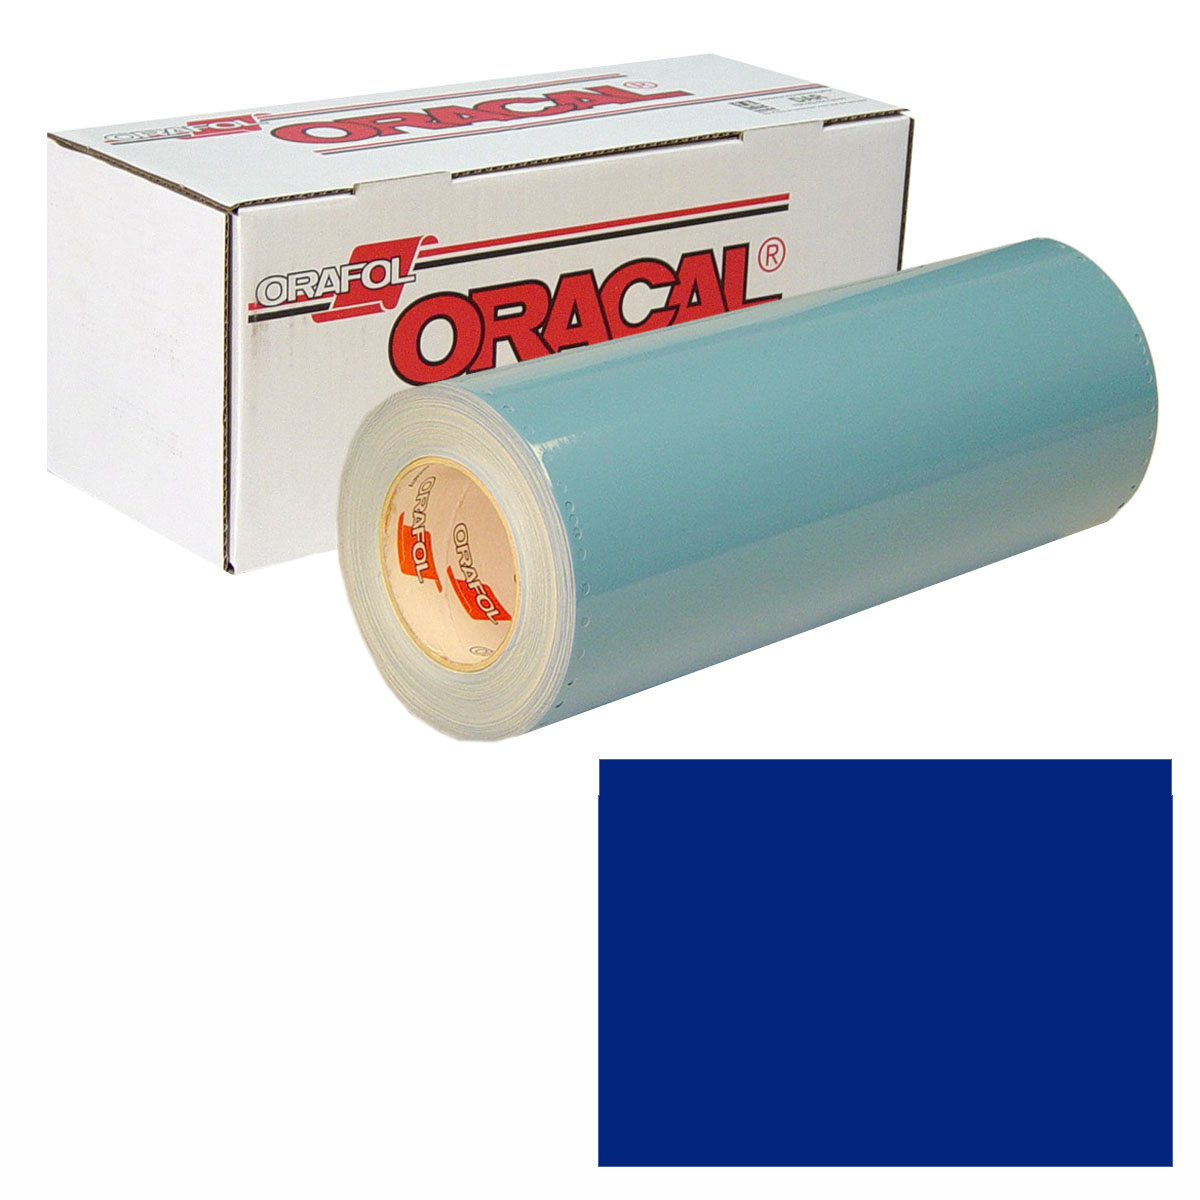 ORACAL 951 30in X 10yd 536 Middle Blue